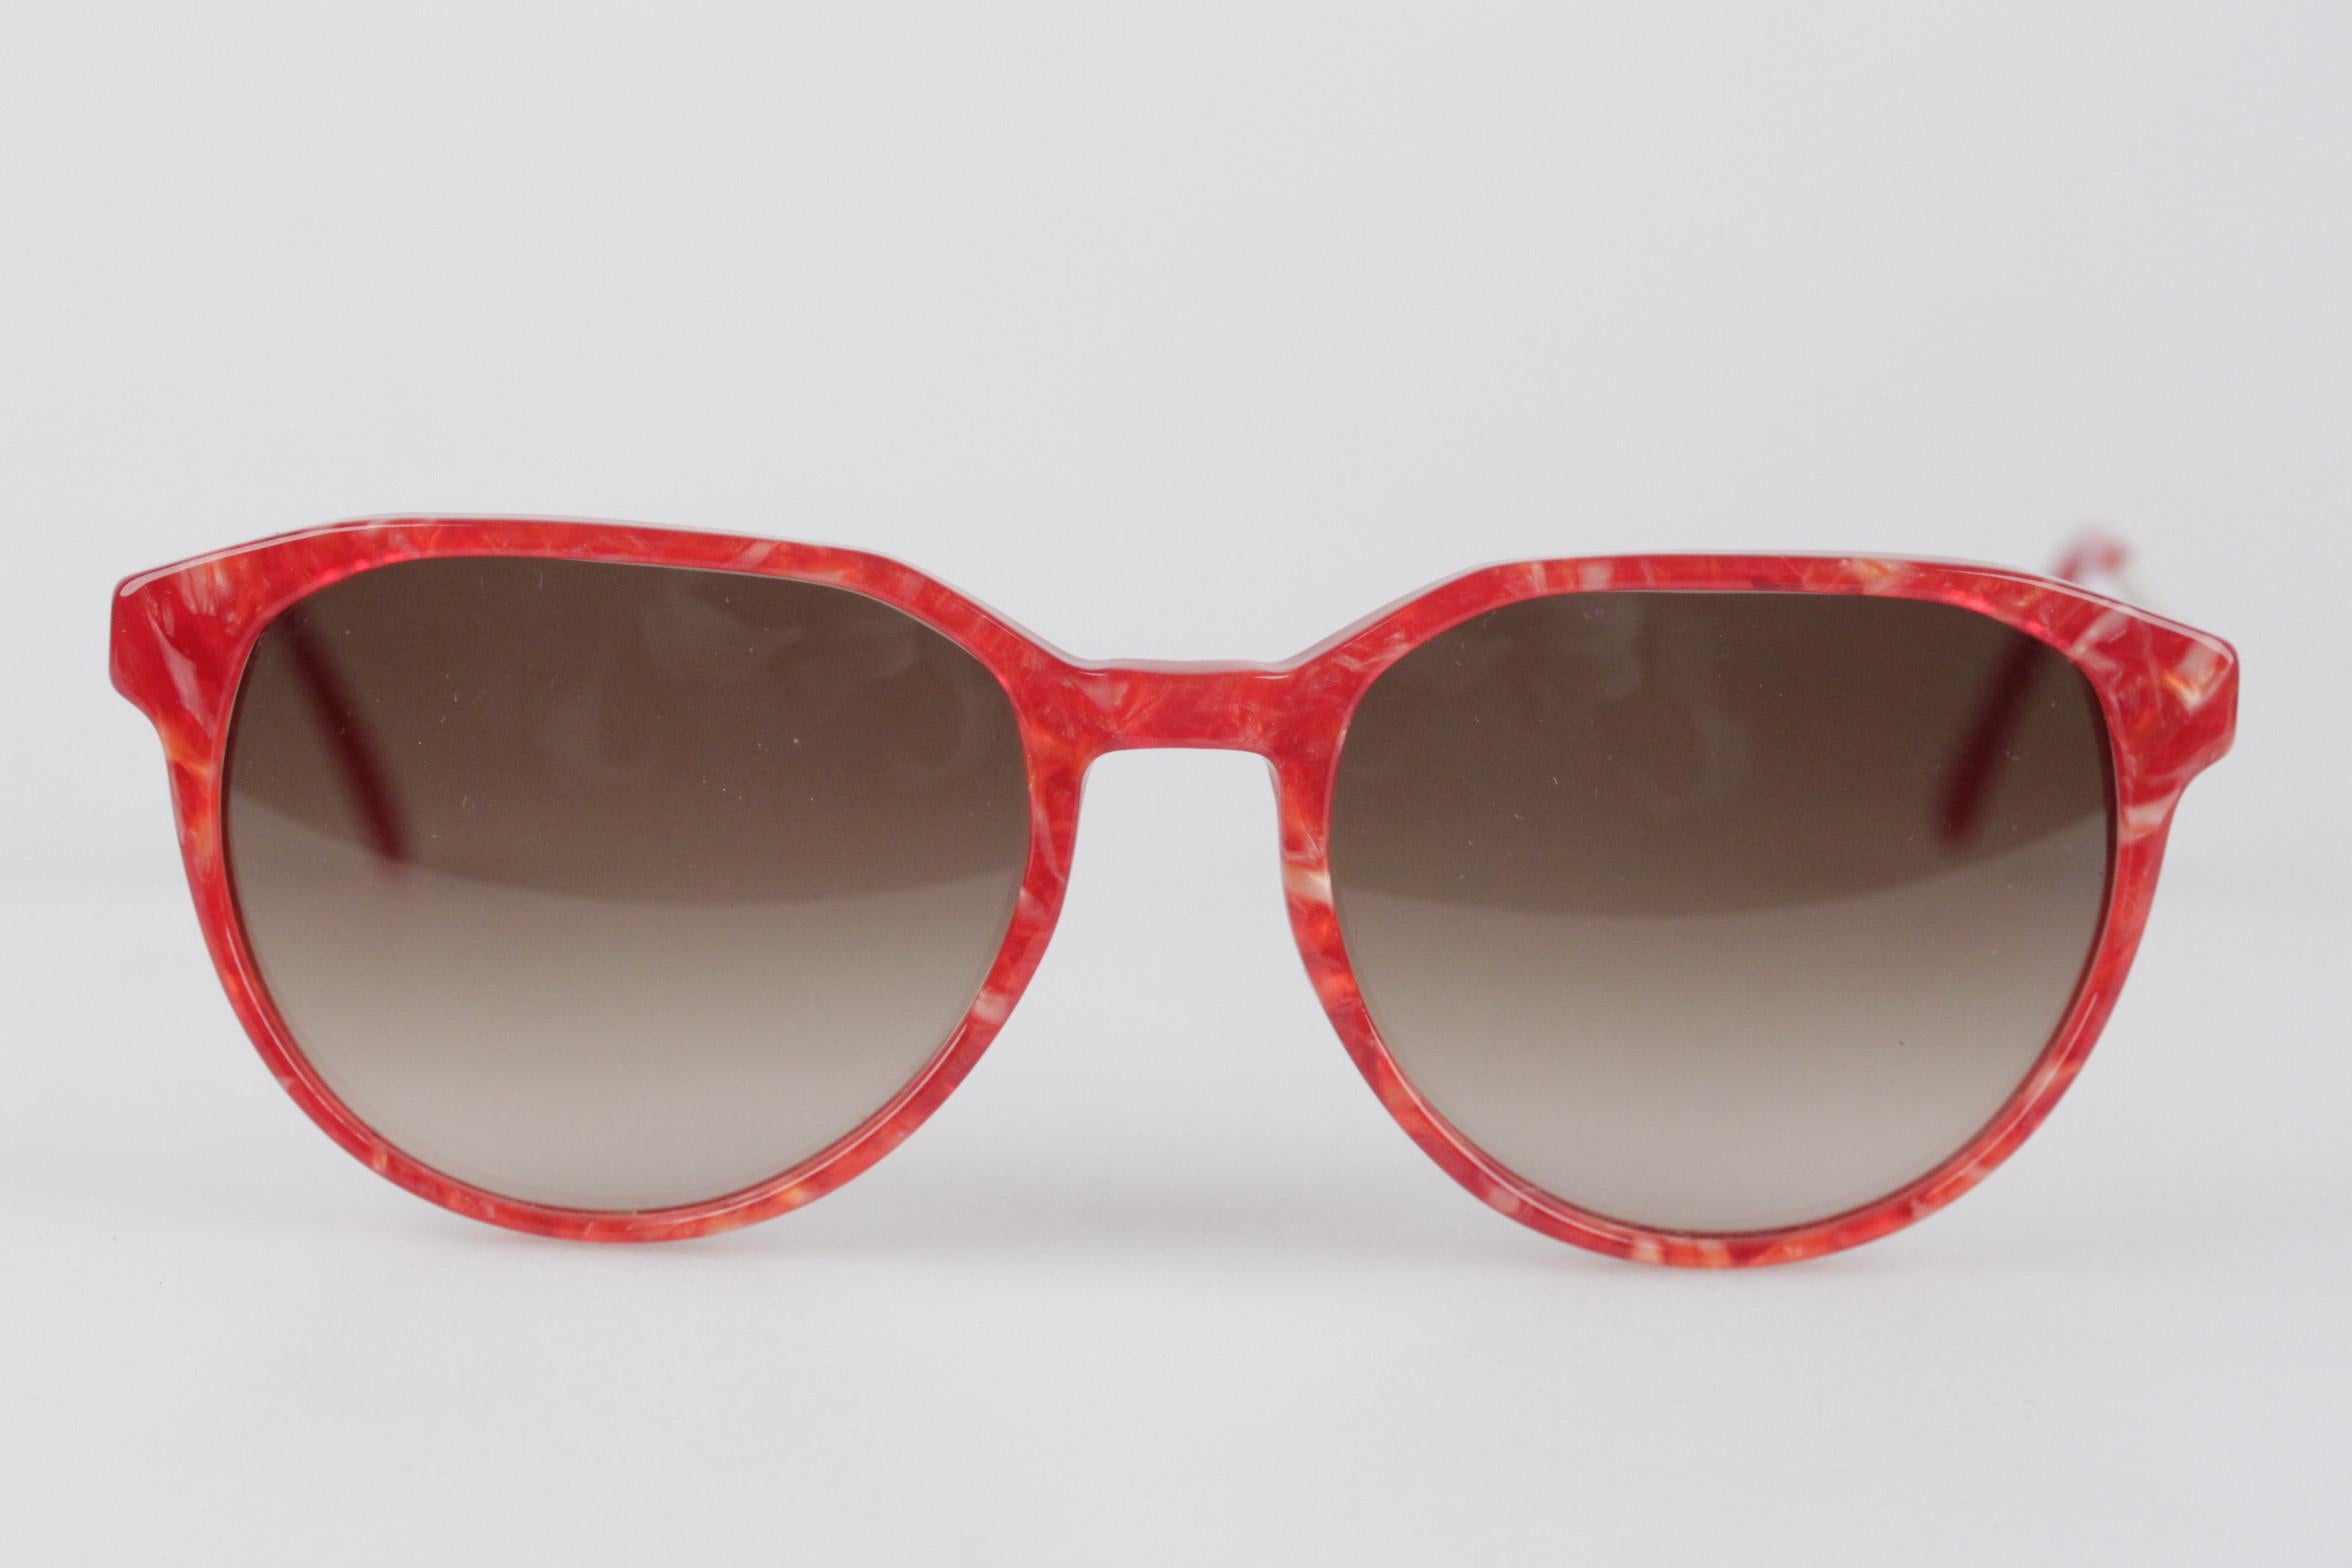 Brown Yves Saint Laurent Vintage Red Sunglasses Mod Persephone New Old Stock